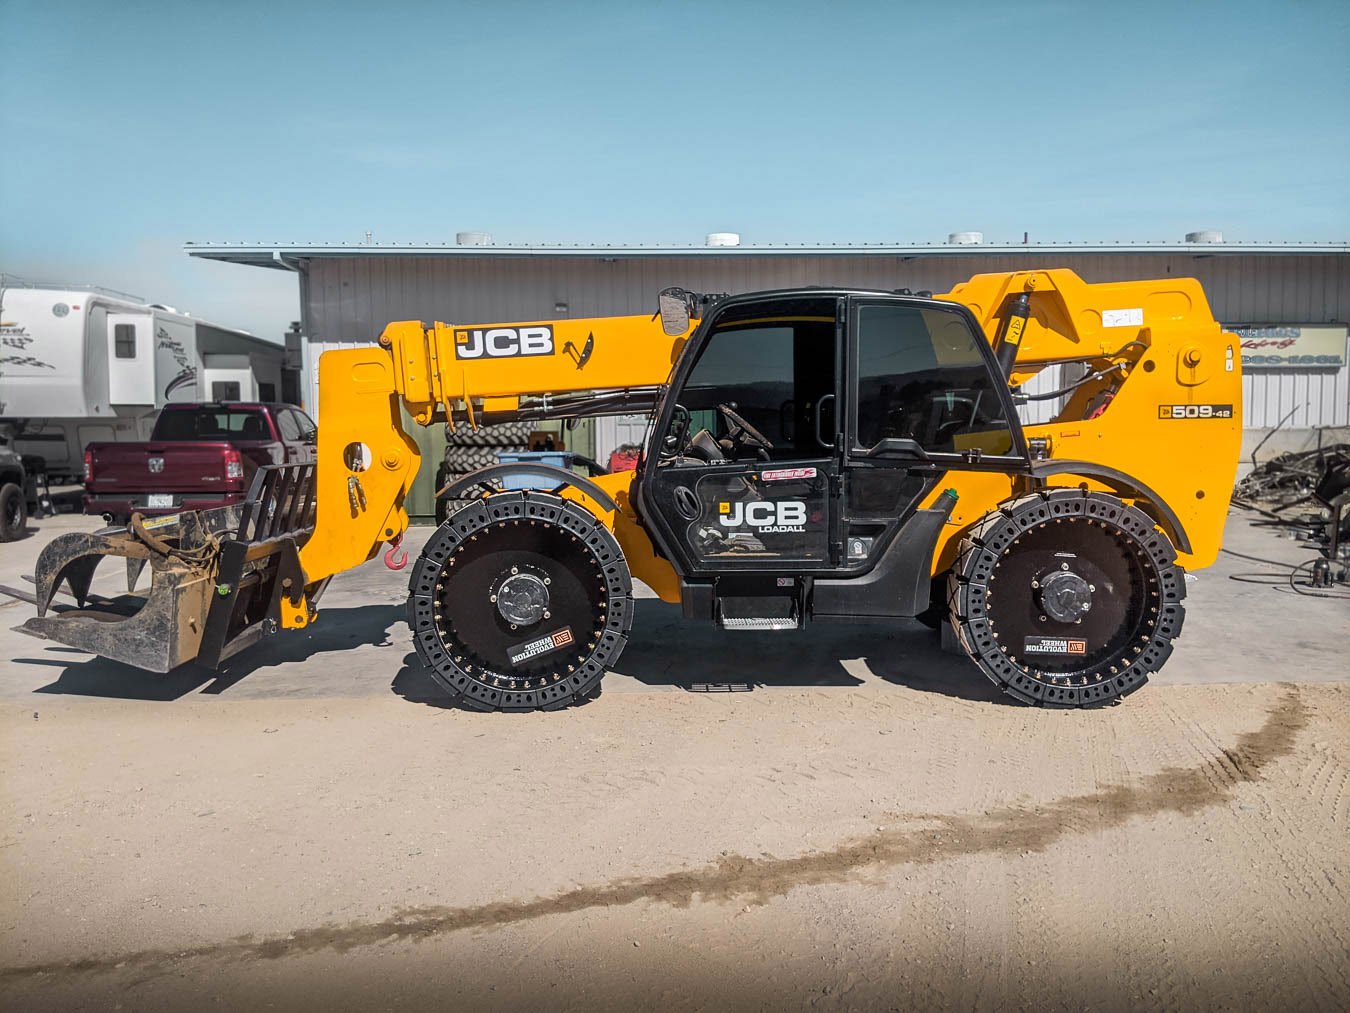 This picture shows our telescopic forklift tires on a black and yellow JCB telehandler